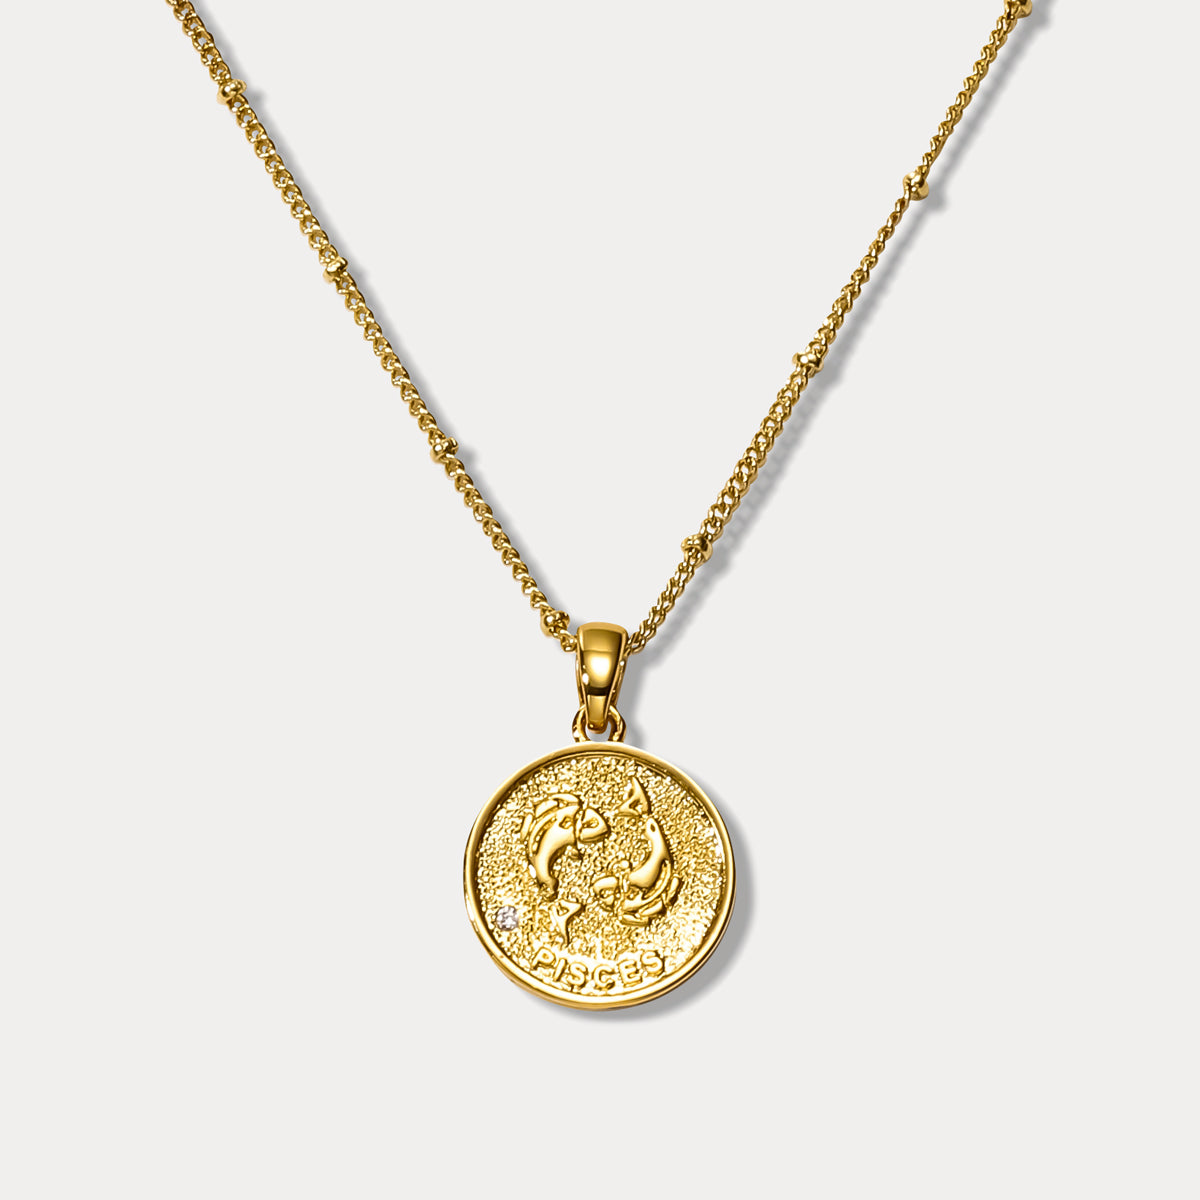 Pisces Constellation Coin Pendant Necklace